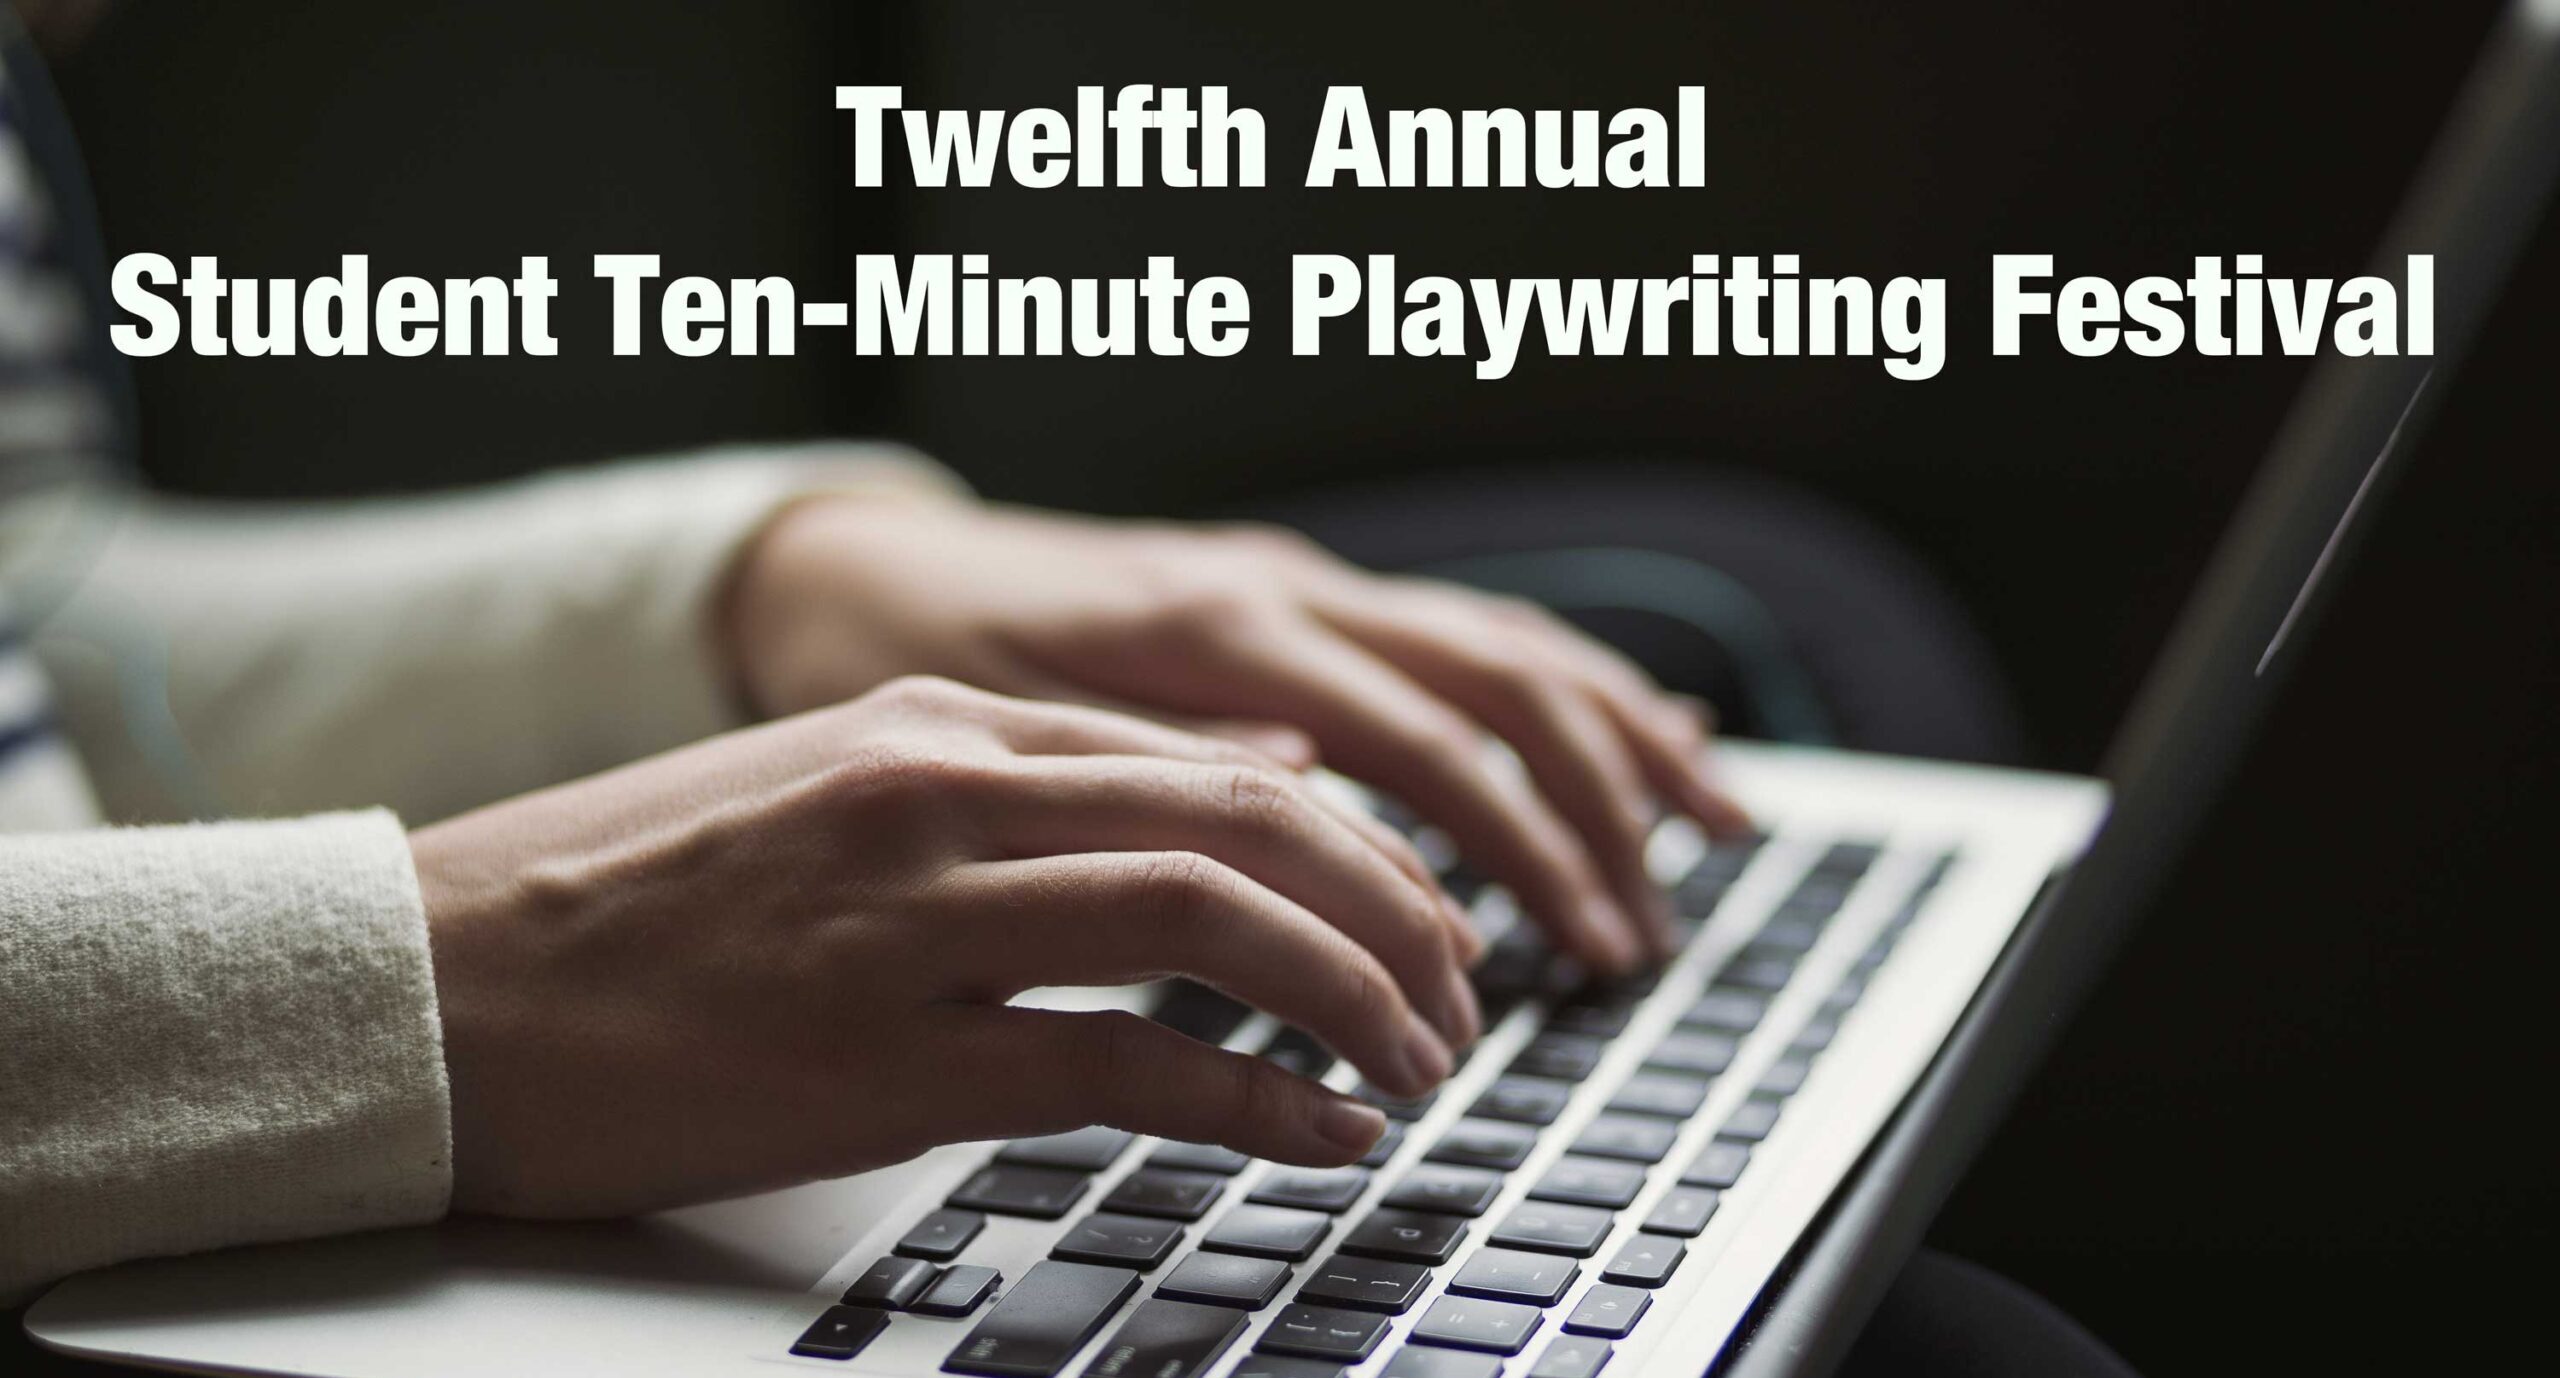 Twelfth Annual Student Ten-Minute Playriting Festival